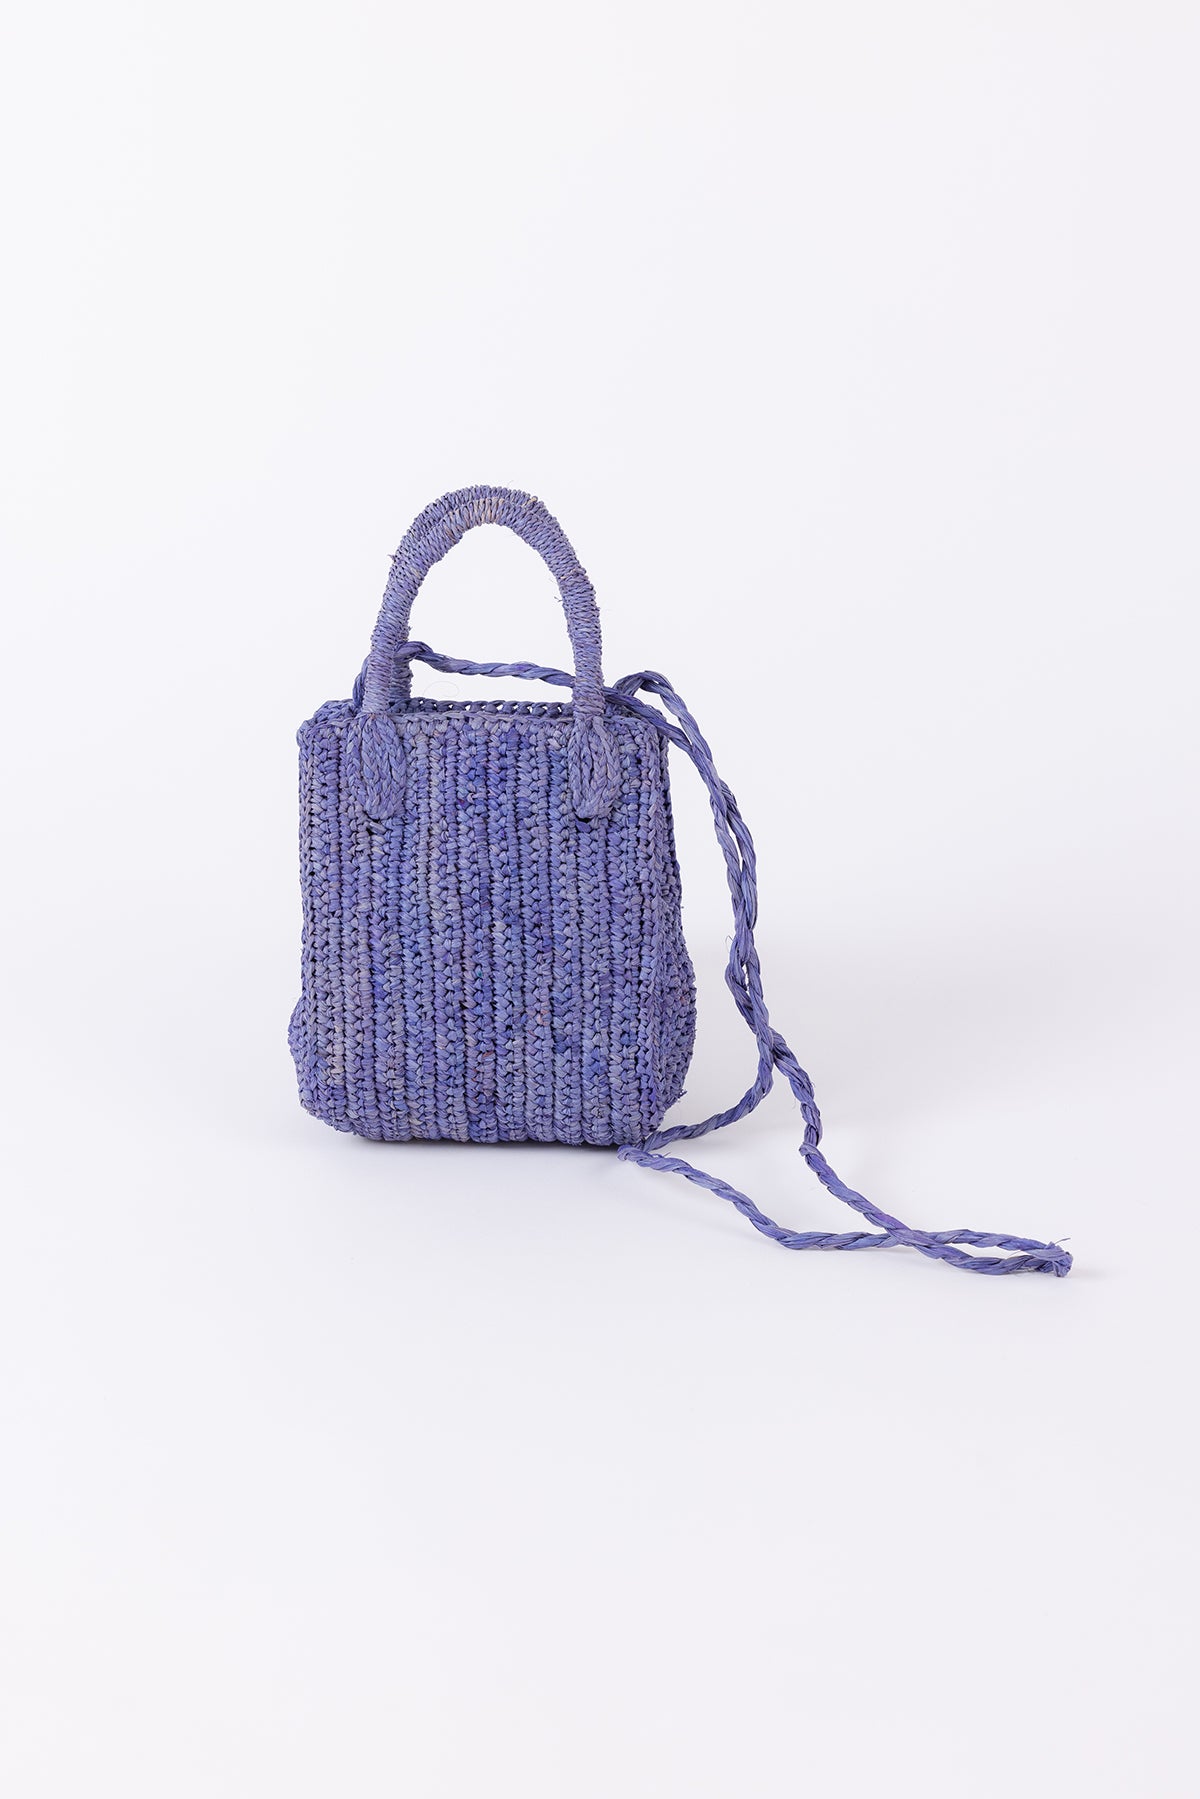   Knitted purple MIMI RAFFIA CROSSBODY bag with a single handle displayed against a white background by Velvet by Graham & Spencer. 